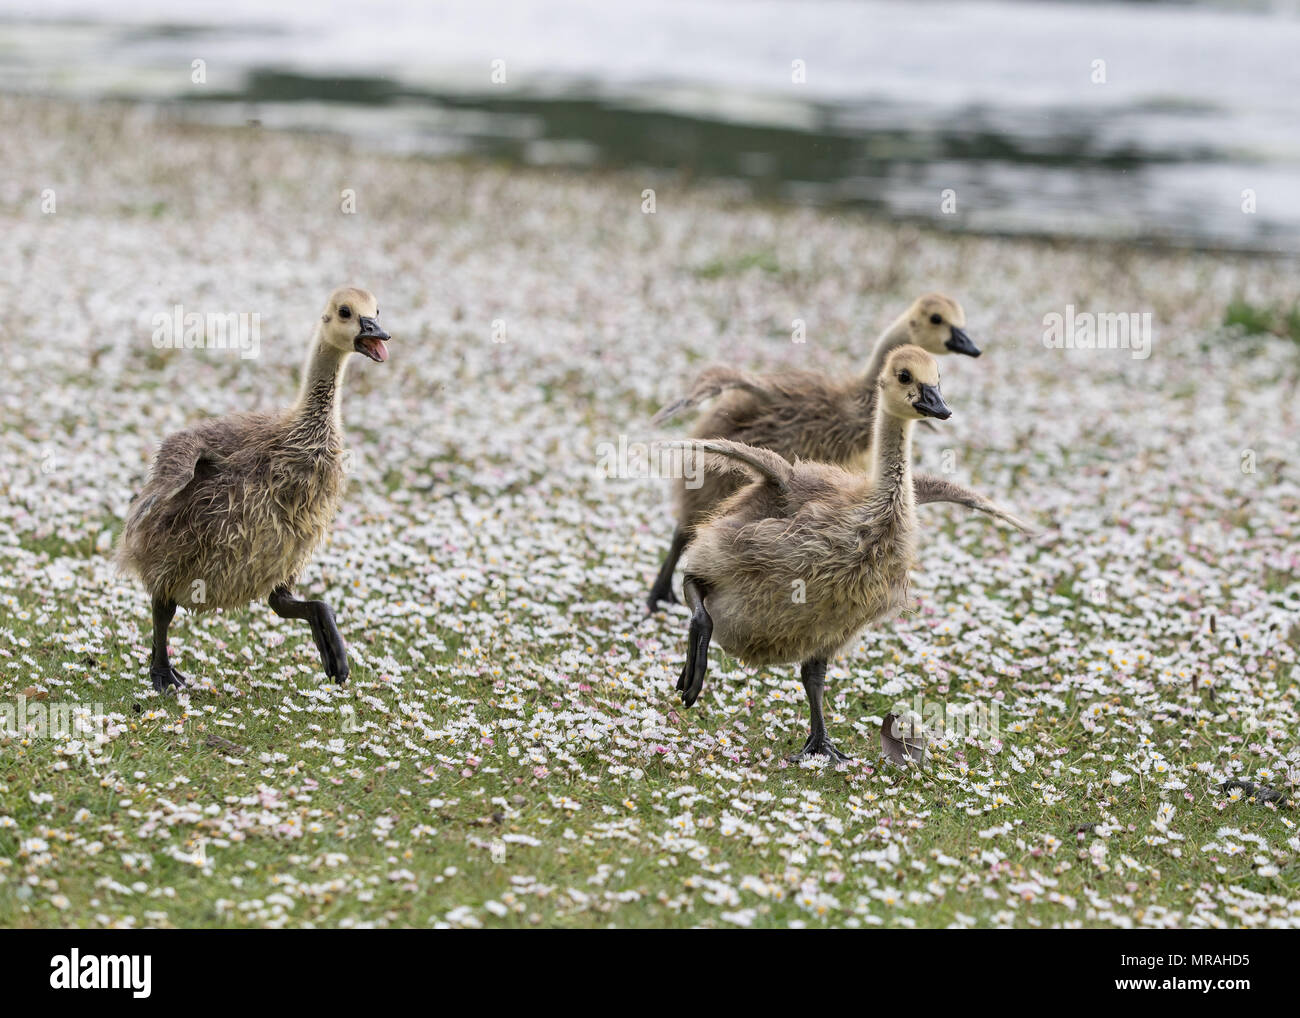 Clumber Park, Worksop, Nottinghamshire, UK. Saturday 26th May 2018. A fluffy Gosling searches for food on a warm day at Clumber Park, Worksop, Nottinghamshire. Credit: James Wilson/Alamy Live News Stock Photo